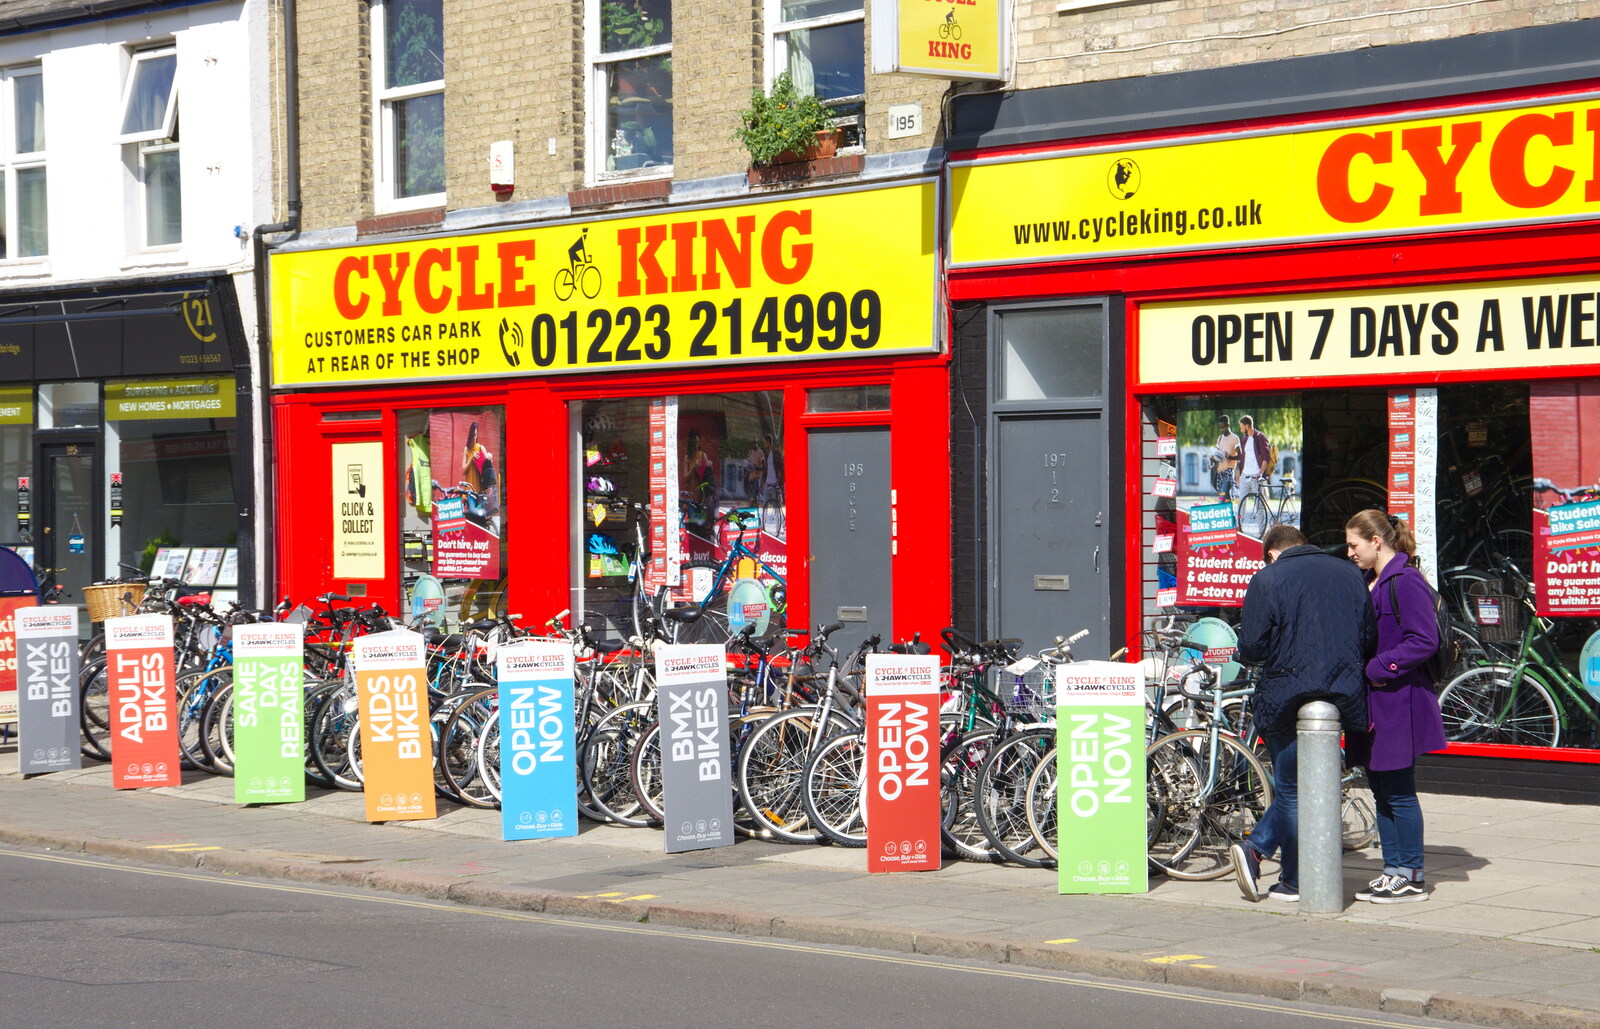 Cycle King is still there on Mill Road from A Musical Night on Mill Road, Cambridge - 8th September 2019